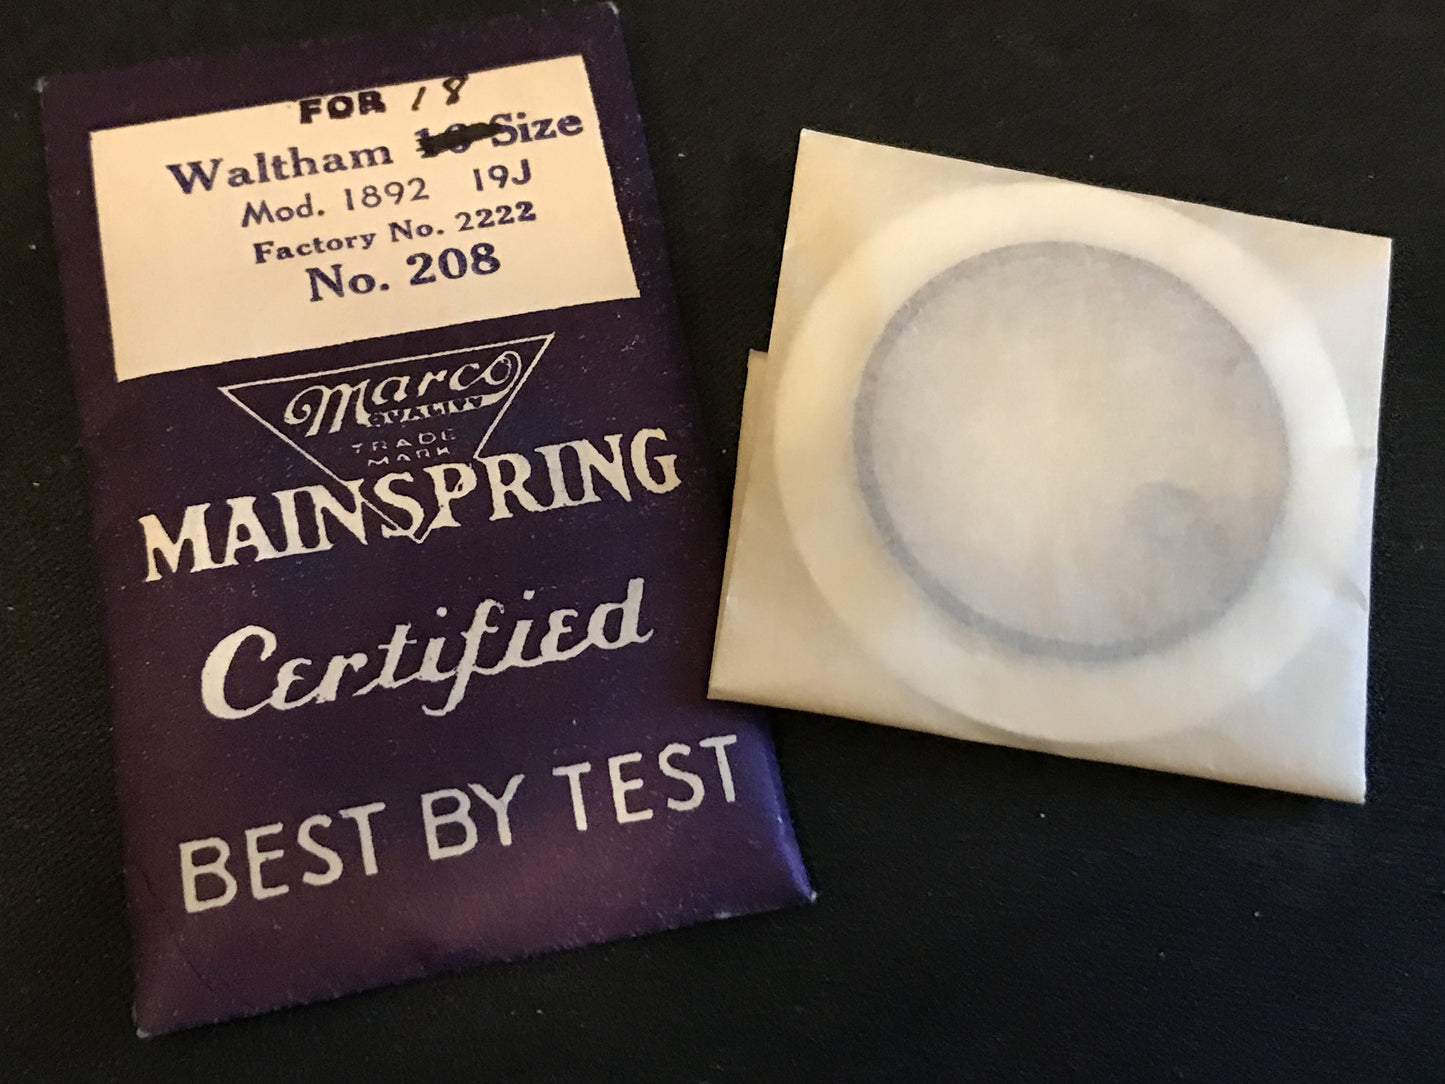 Marco Mainspring #208 for 18s Waltham 19j Model 1892 # 2222 - Steel